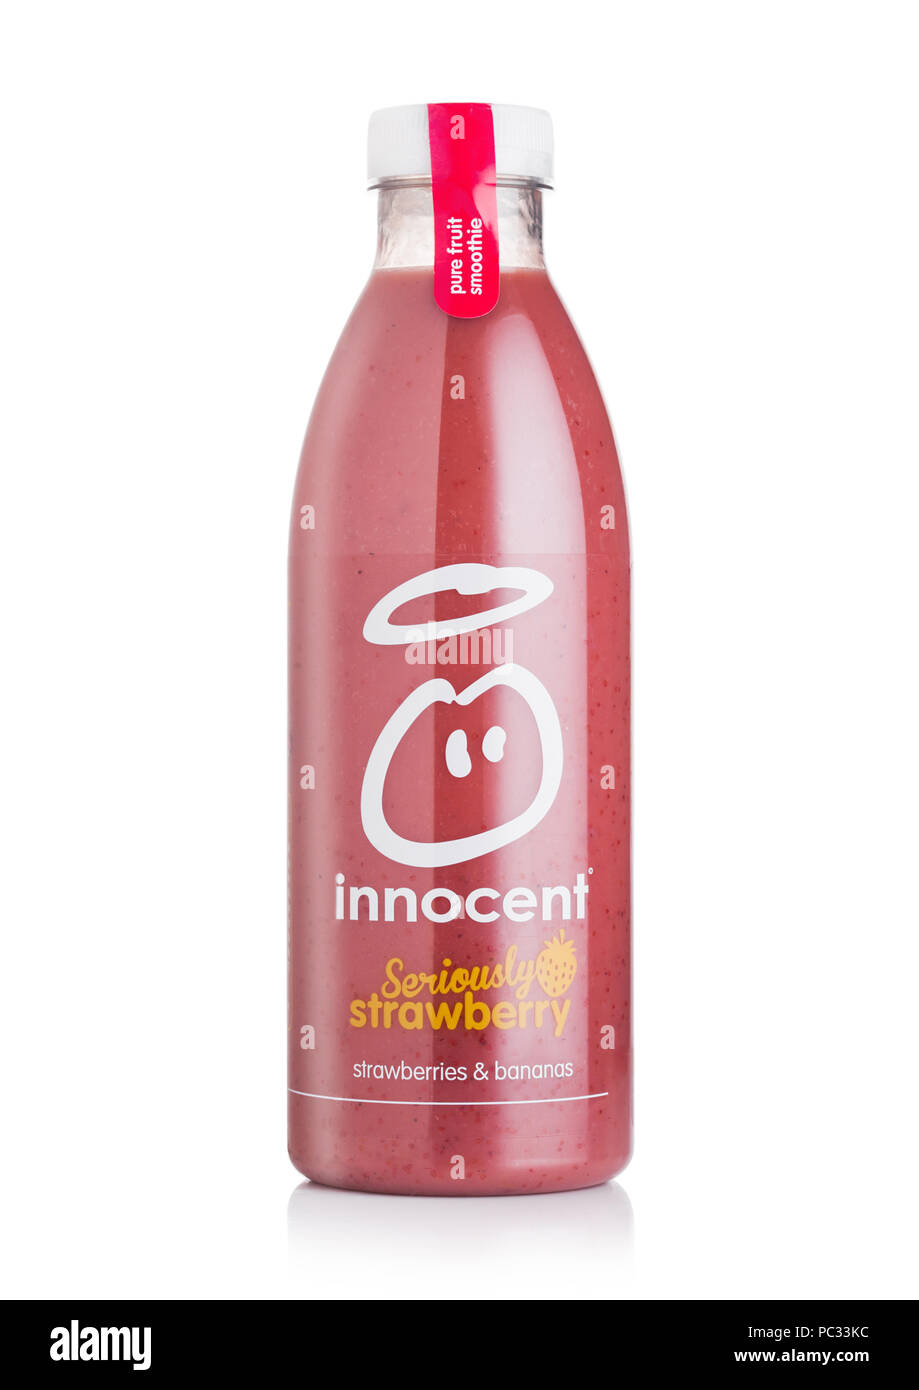 LONDON, UK - AUGUST 10, 2018: Bottle of Innocent organic smoothie juice drink with strawberry and banana flavour on white. Stock Photo